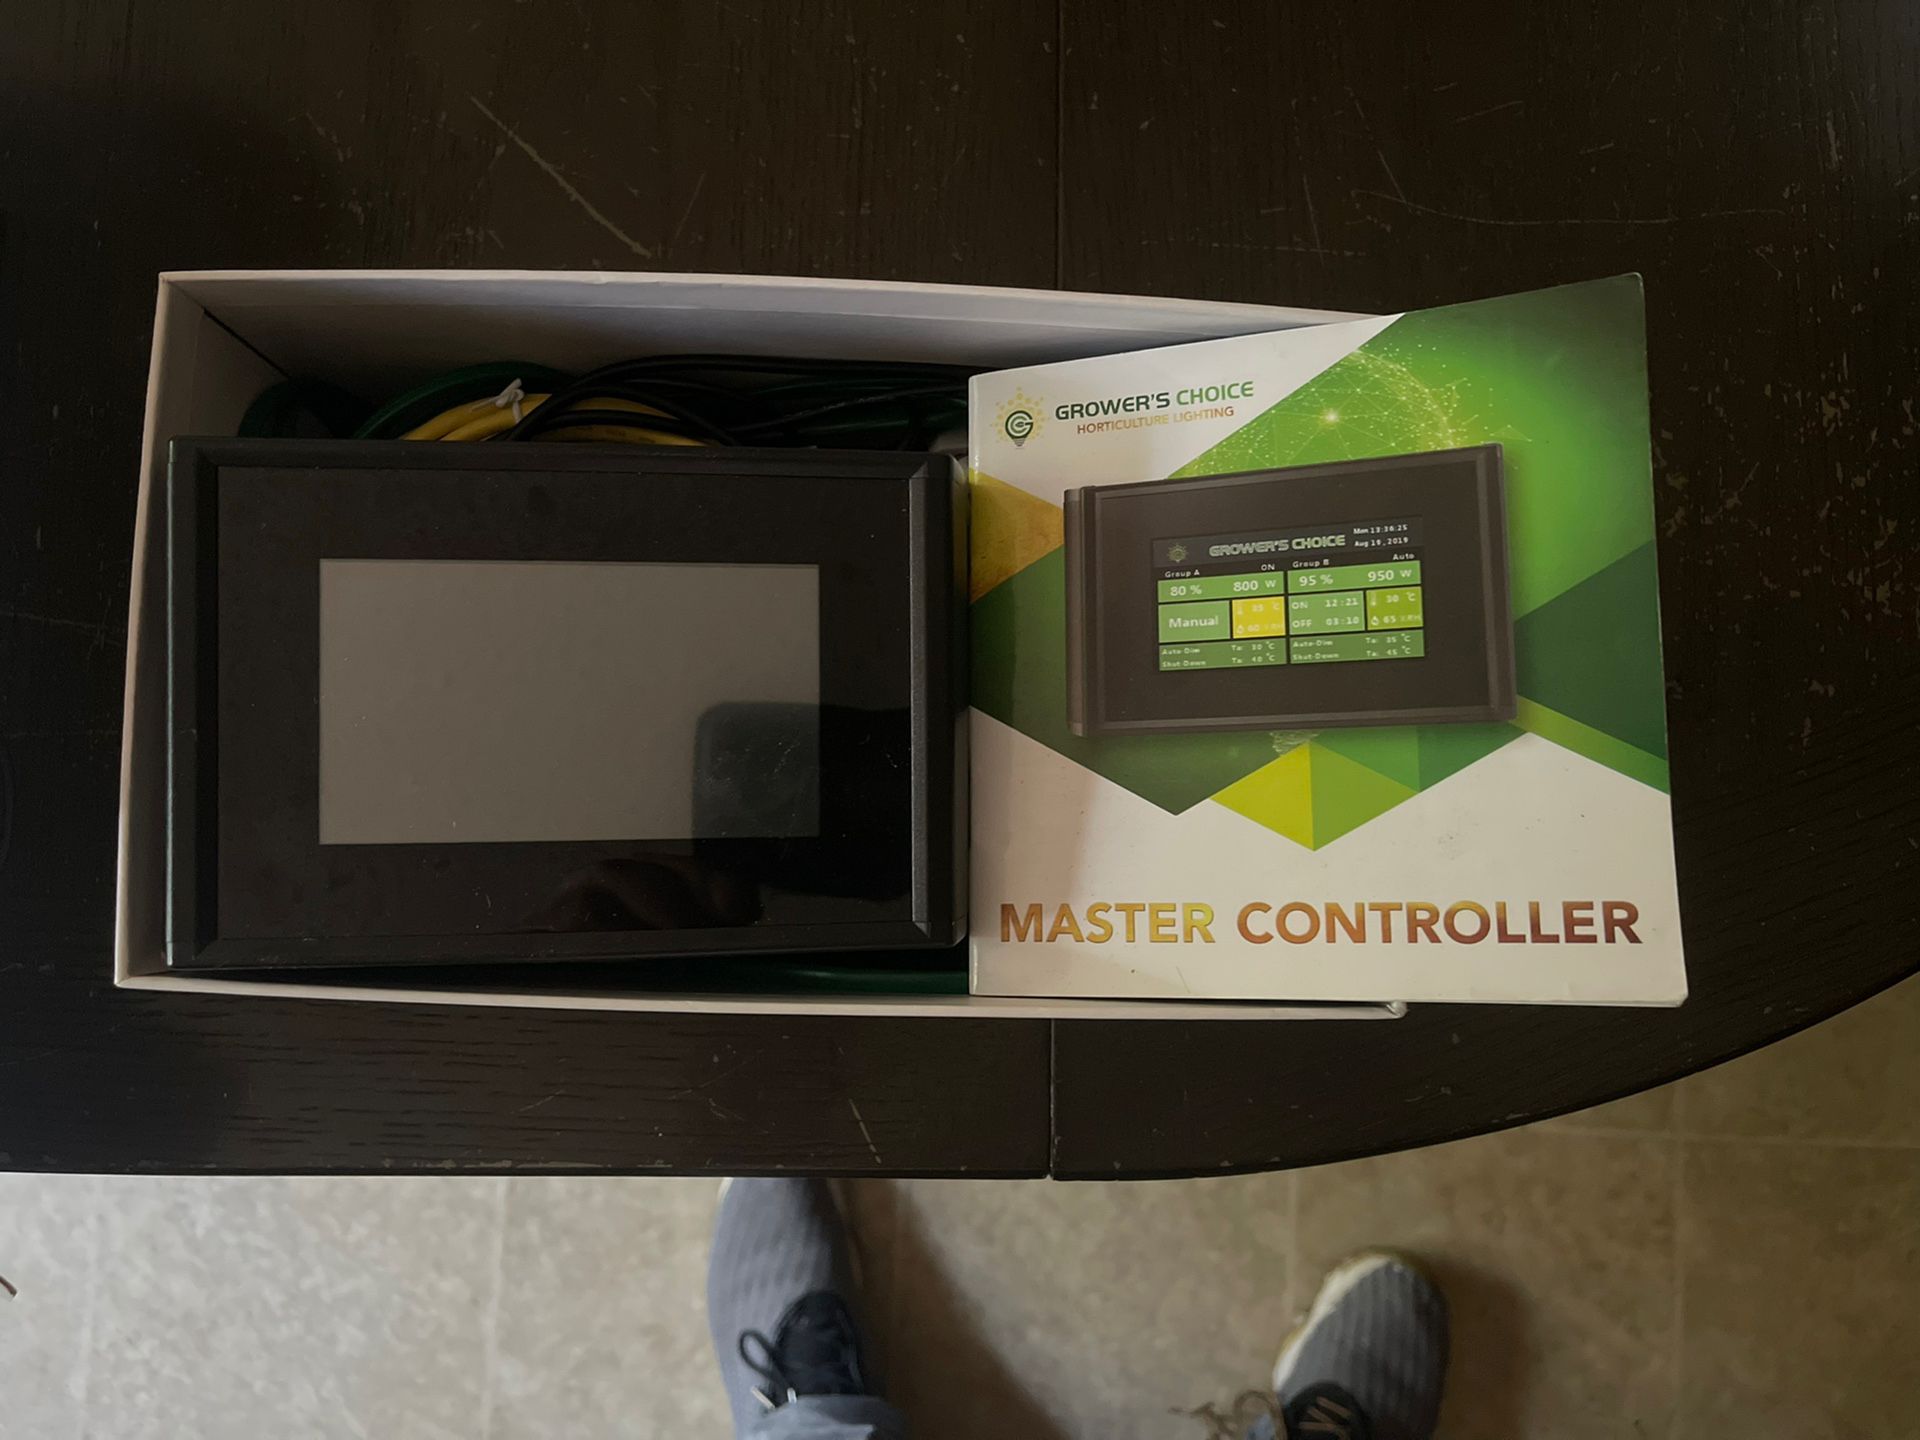 Growers choice master controller